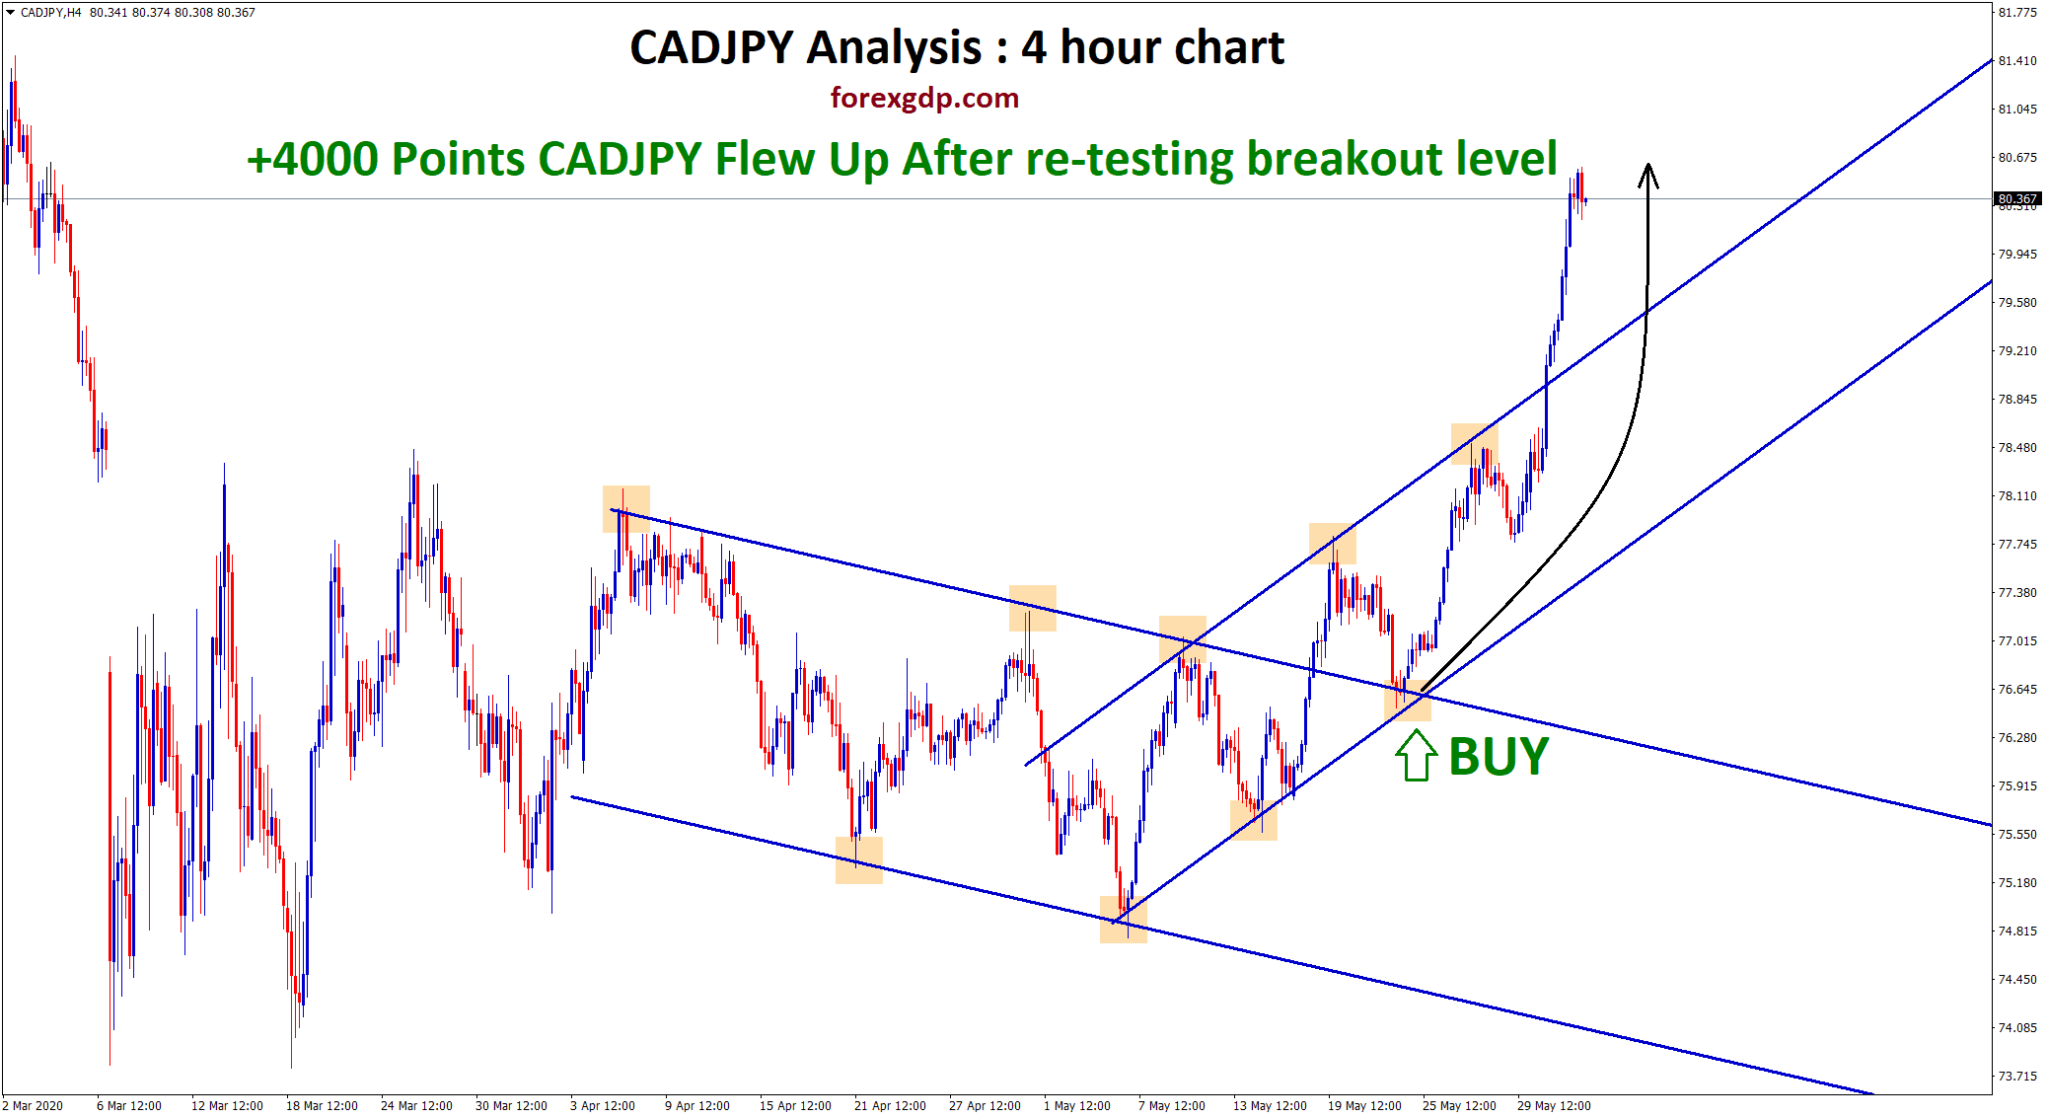 CADJPY flew up 400 pips after retest